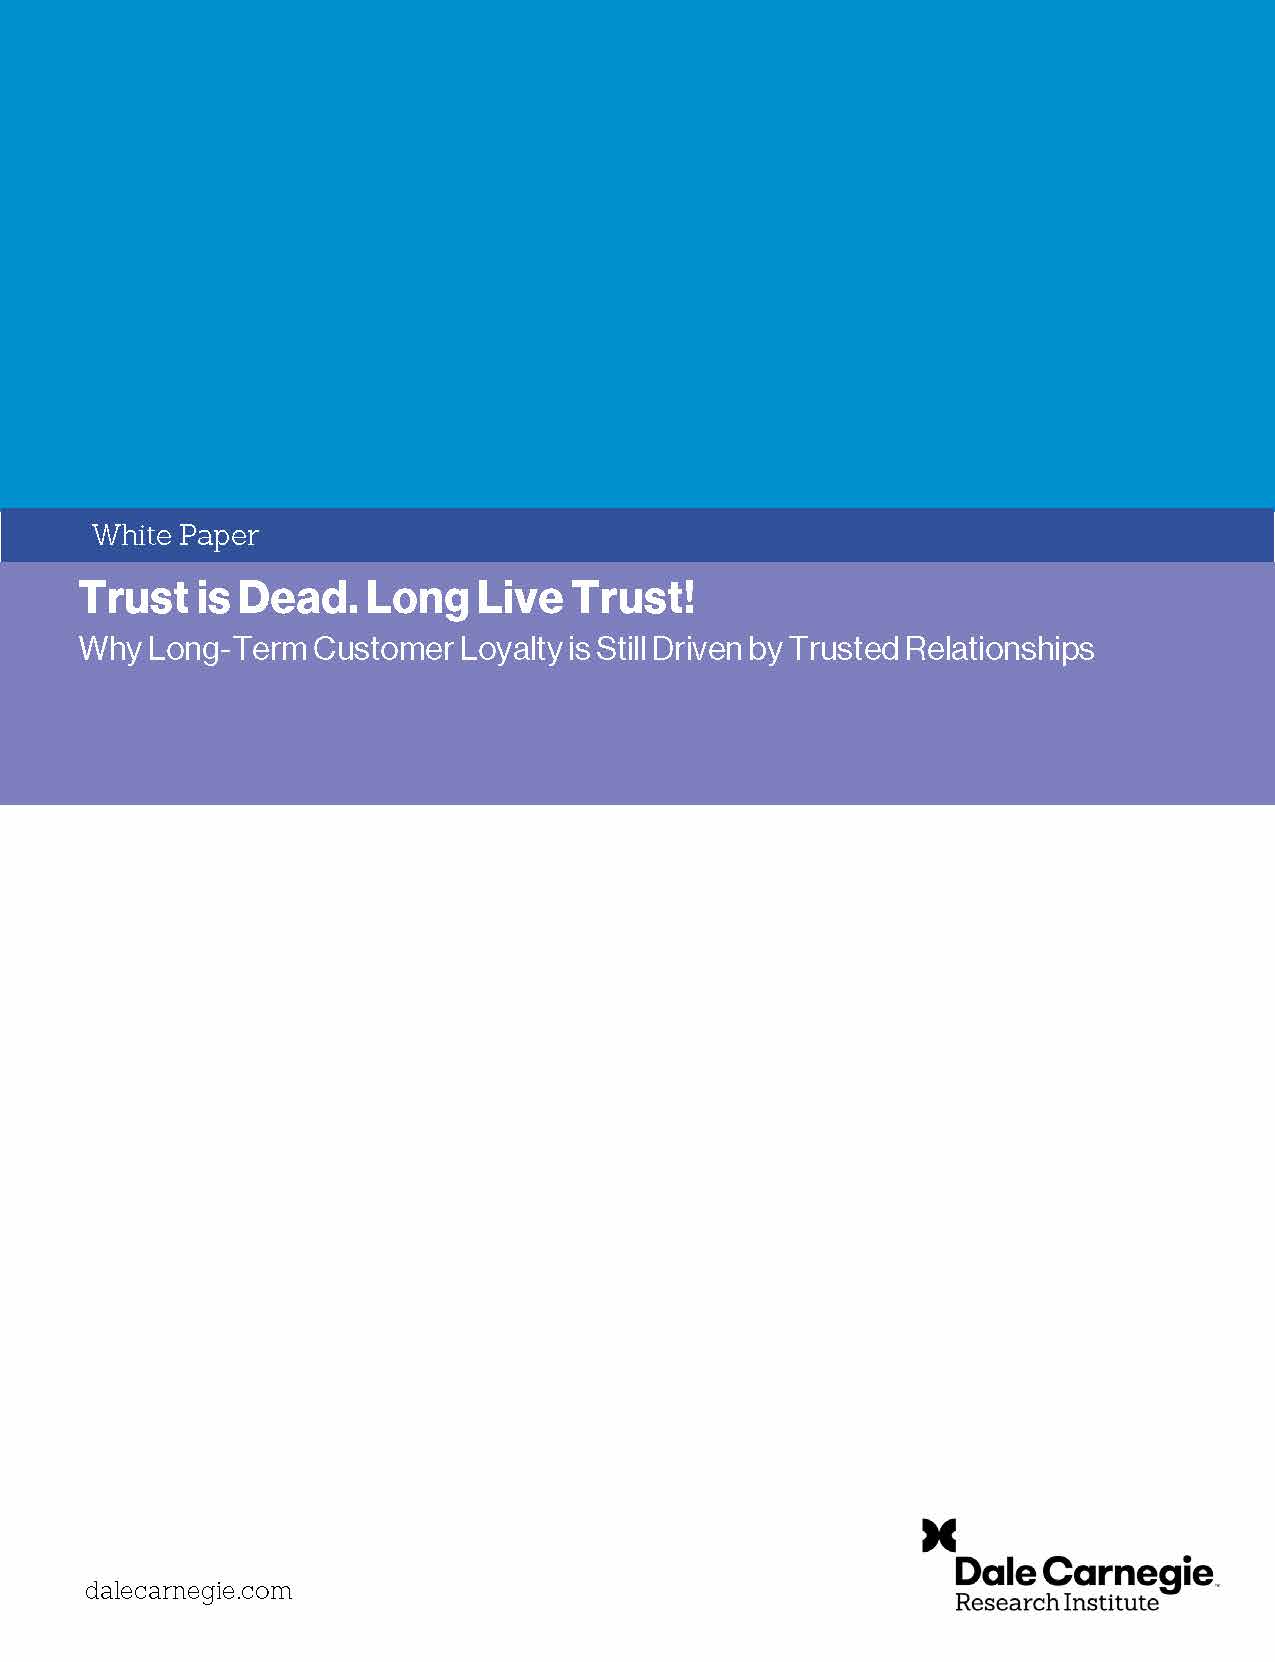 Trust is Dead. Long Live Trust! Why Long-Term Customer Loyalty is Still Driven by Trusted Relationships